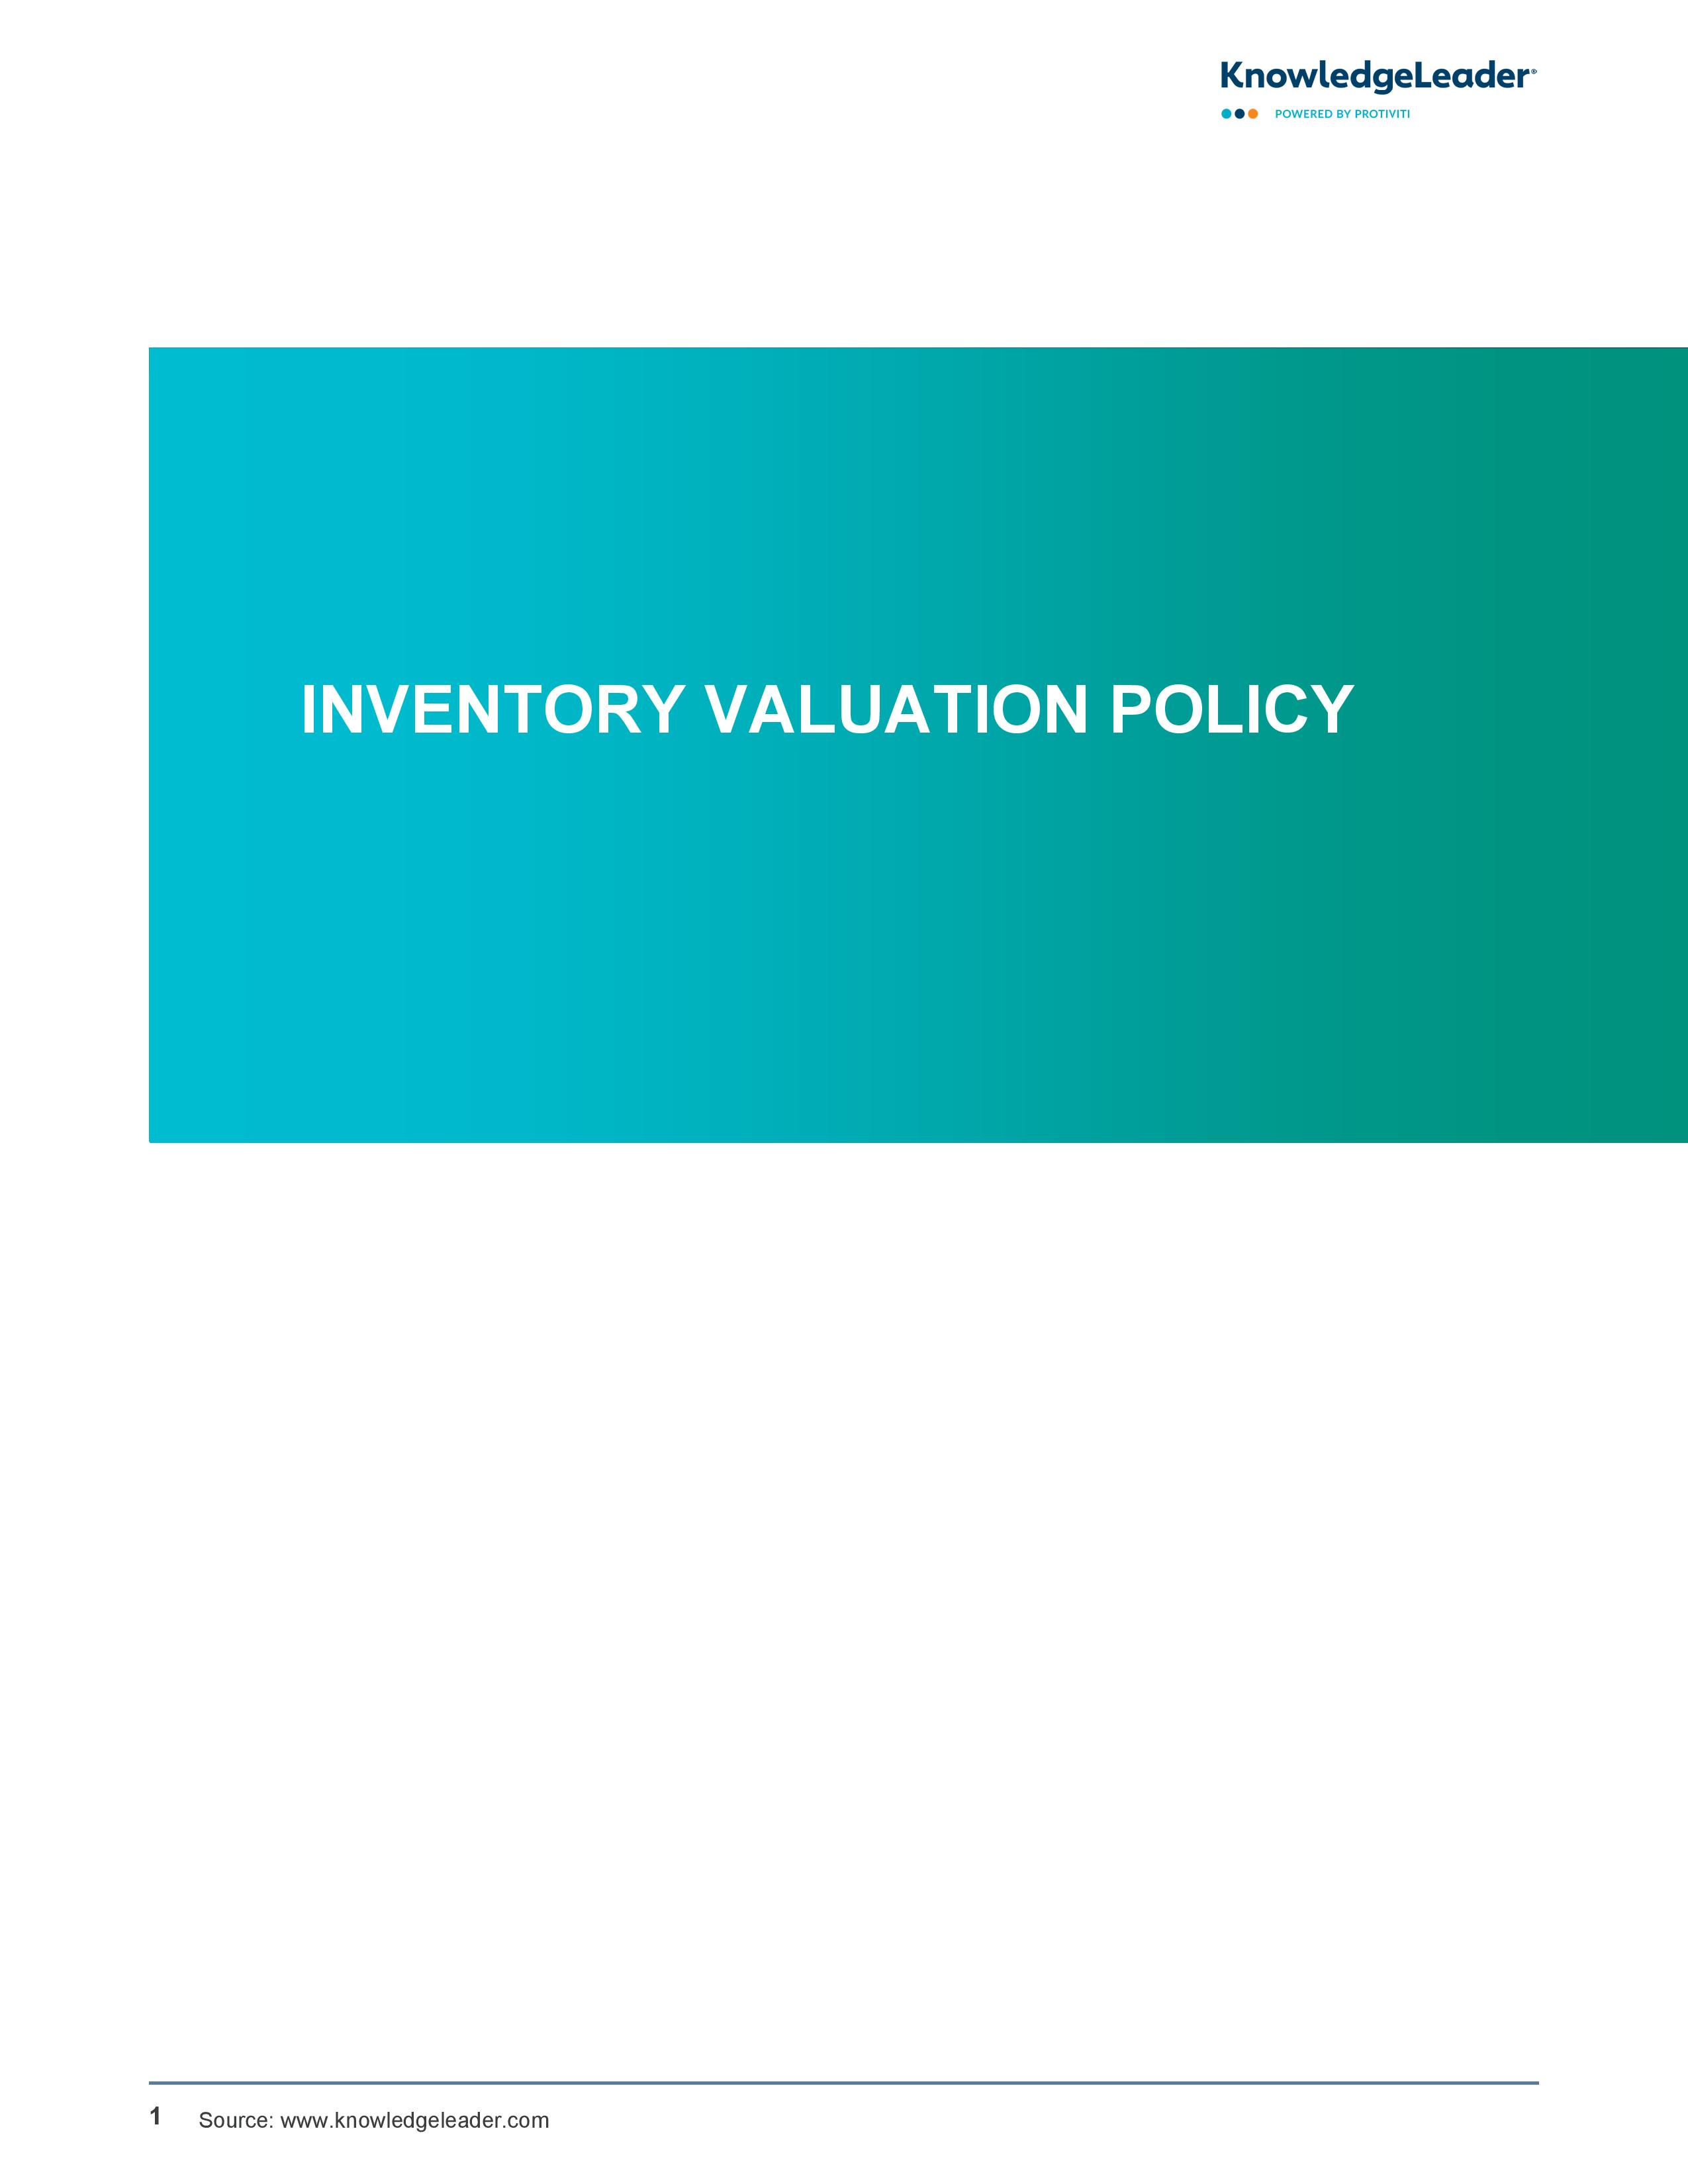 screenshot of the first page of Inventory Valuation Policy